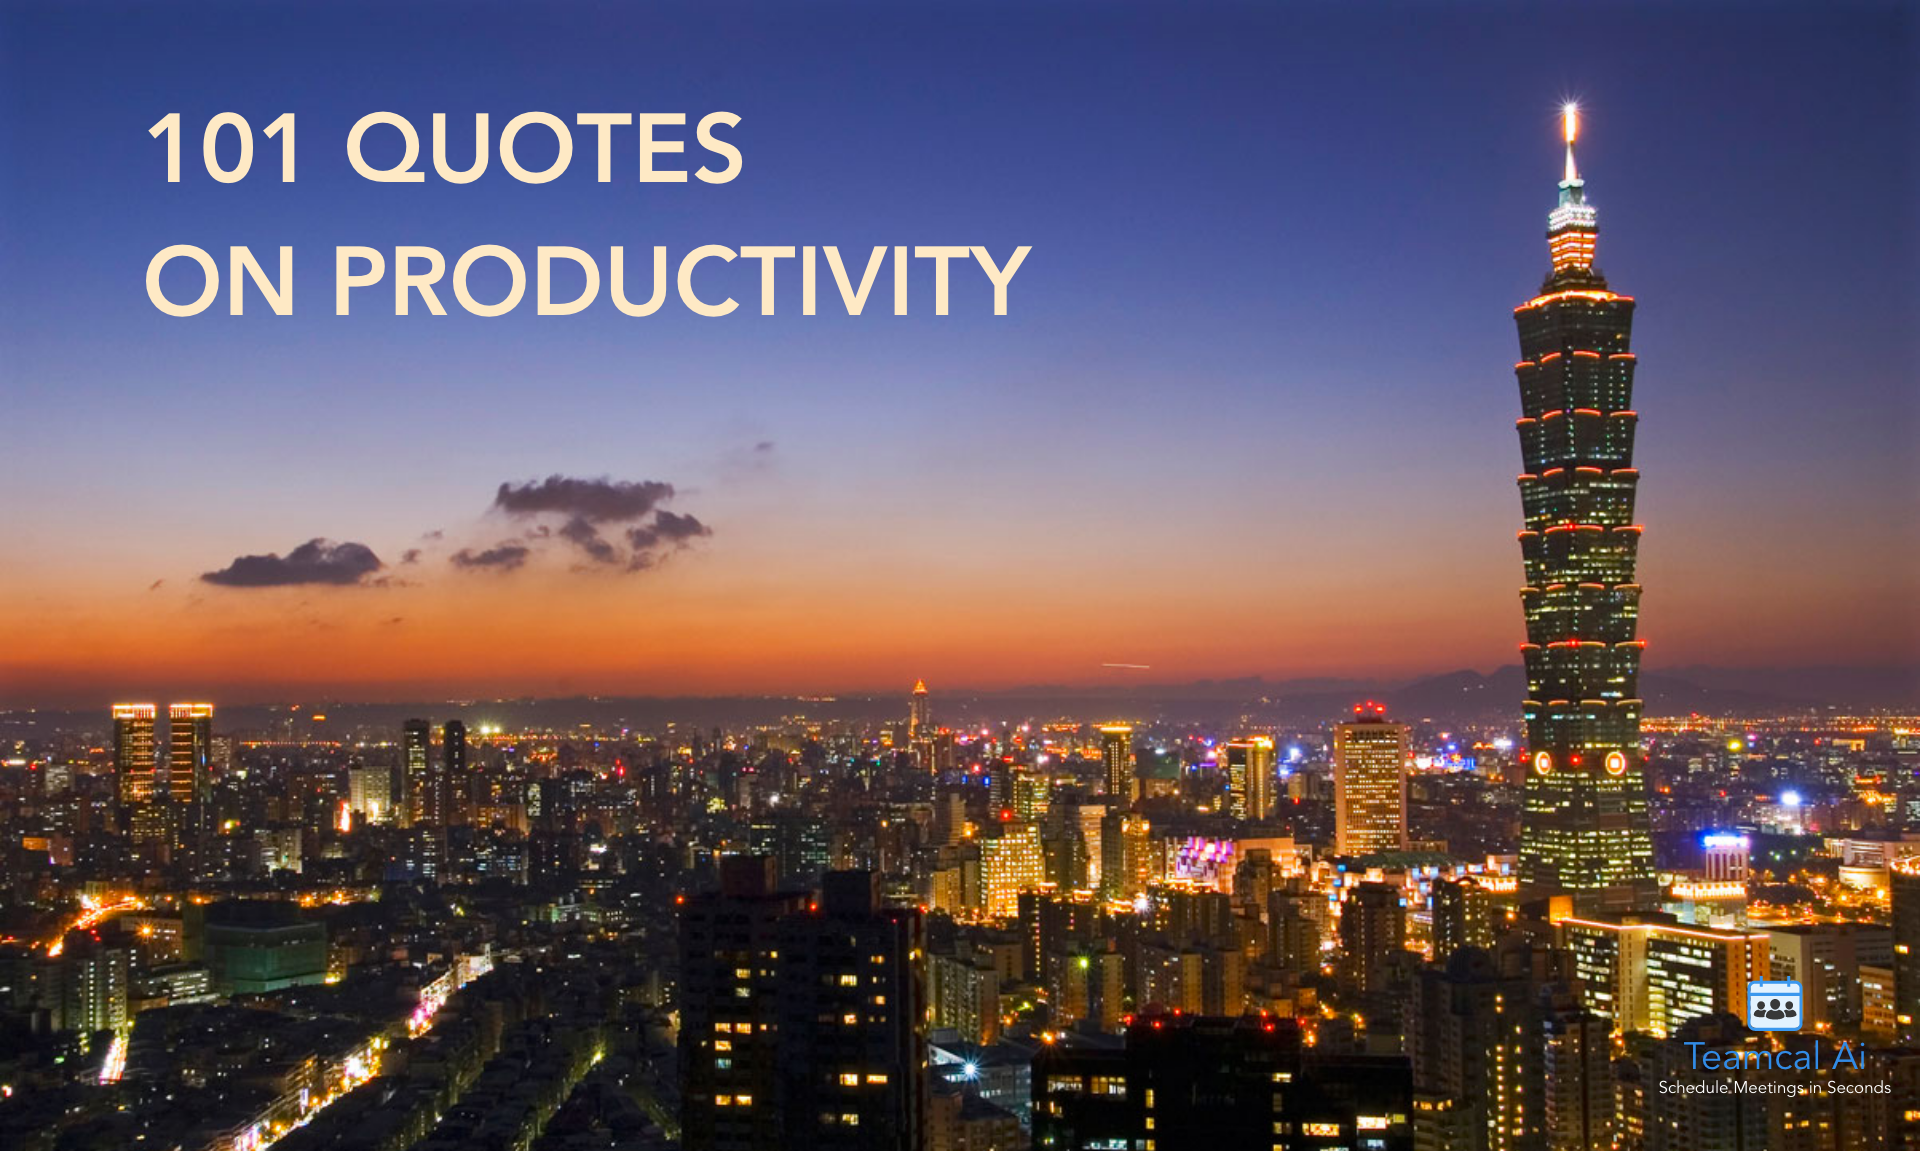 image of 101 Quotes on Productivity